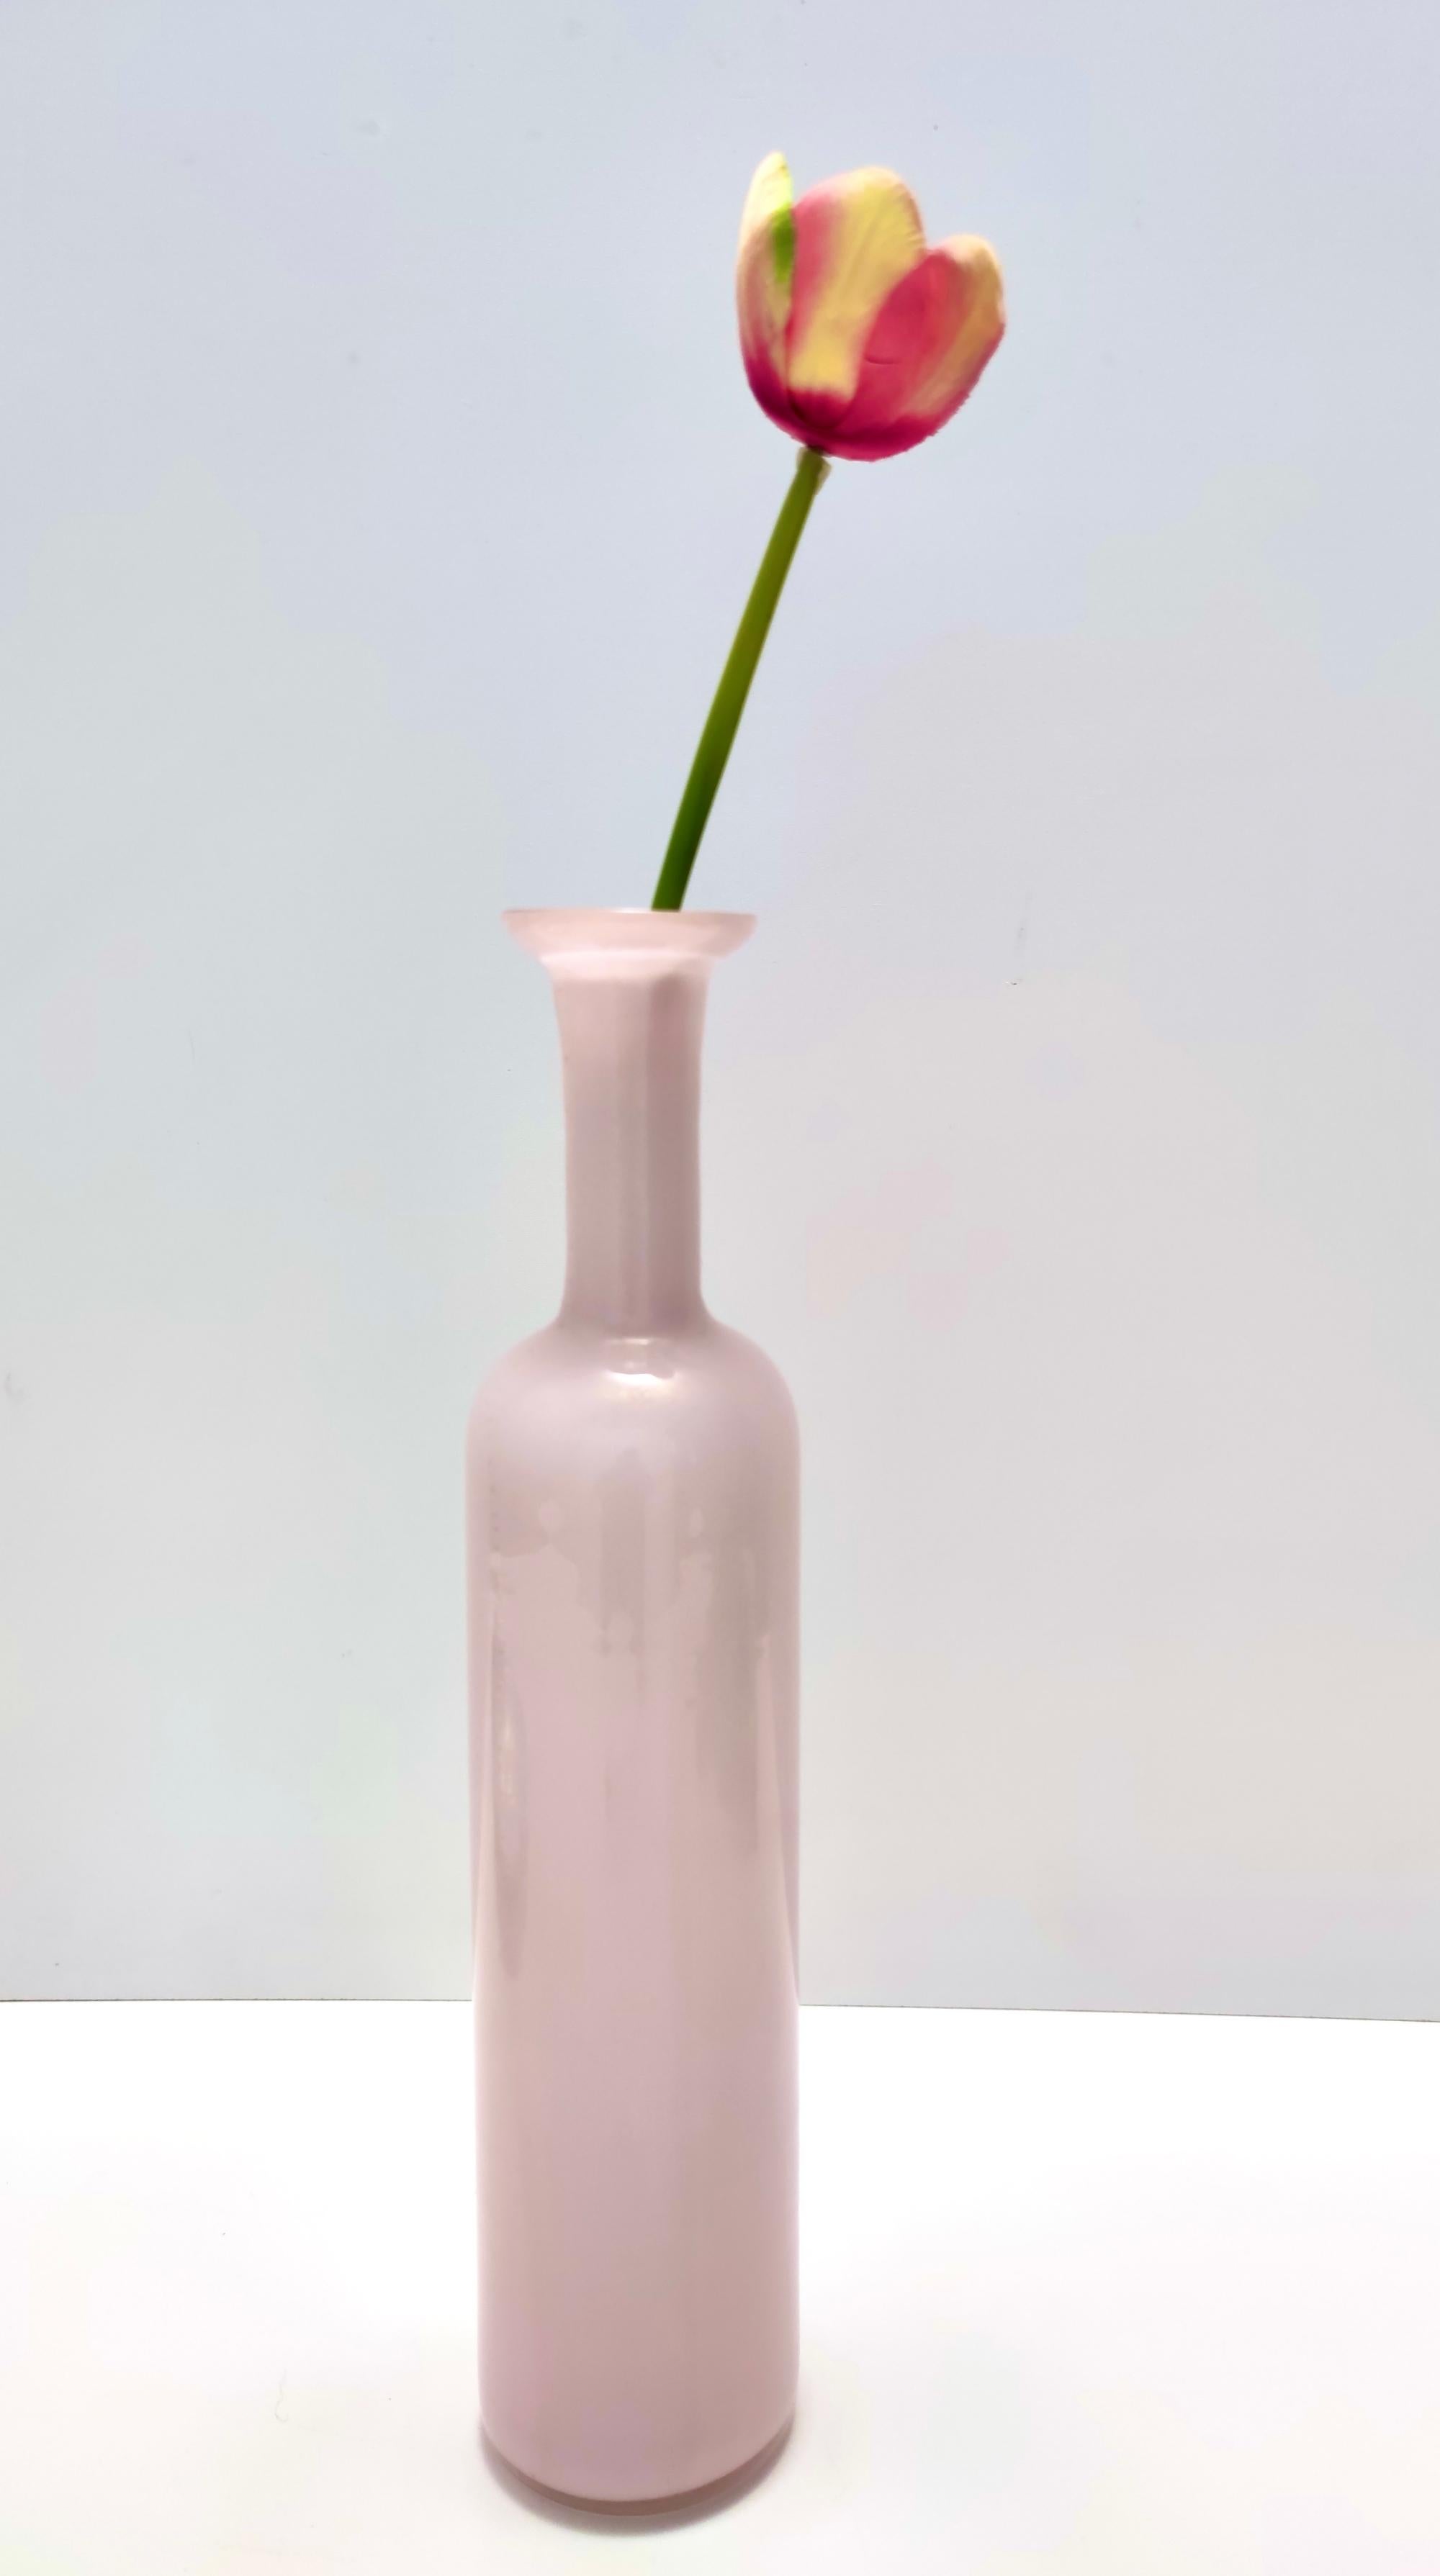 Made in Italy, 1970s. 
This wonderful vase / bottle is made in pink encased Murano glass with gold leaf.
It is a vintage piece, therefore it might show slight traces of use, but it can be considered as in excellent original condition and ready to